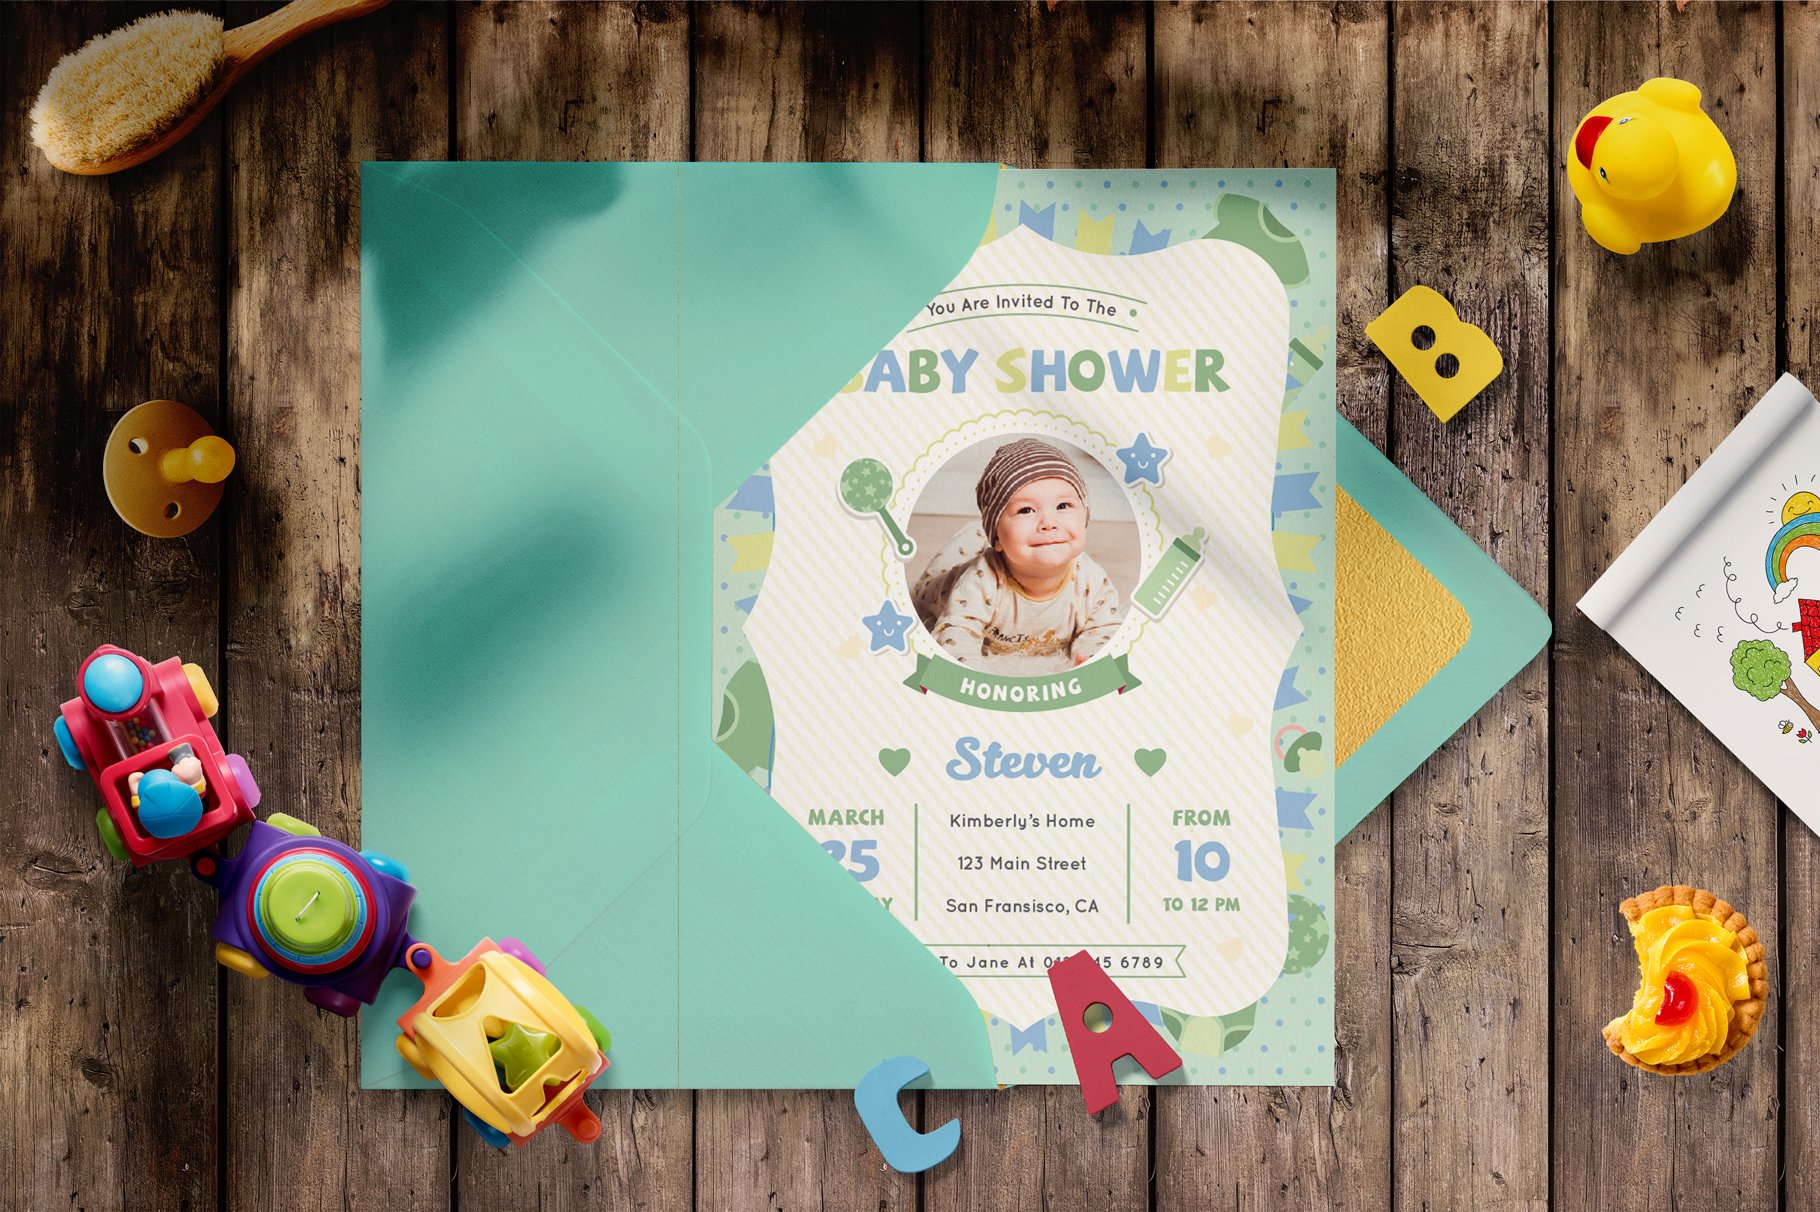 BABY SHOWER INVITATION cover image.